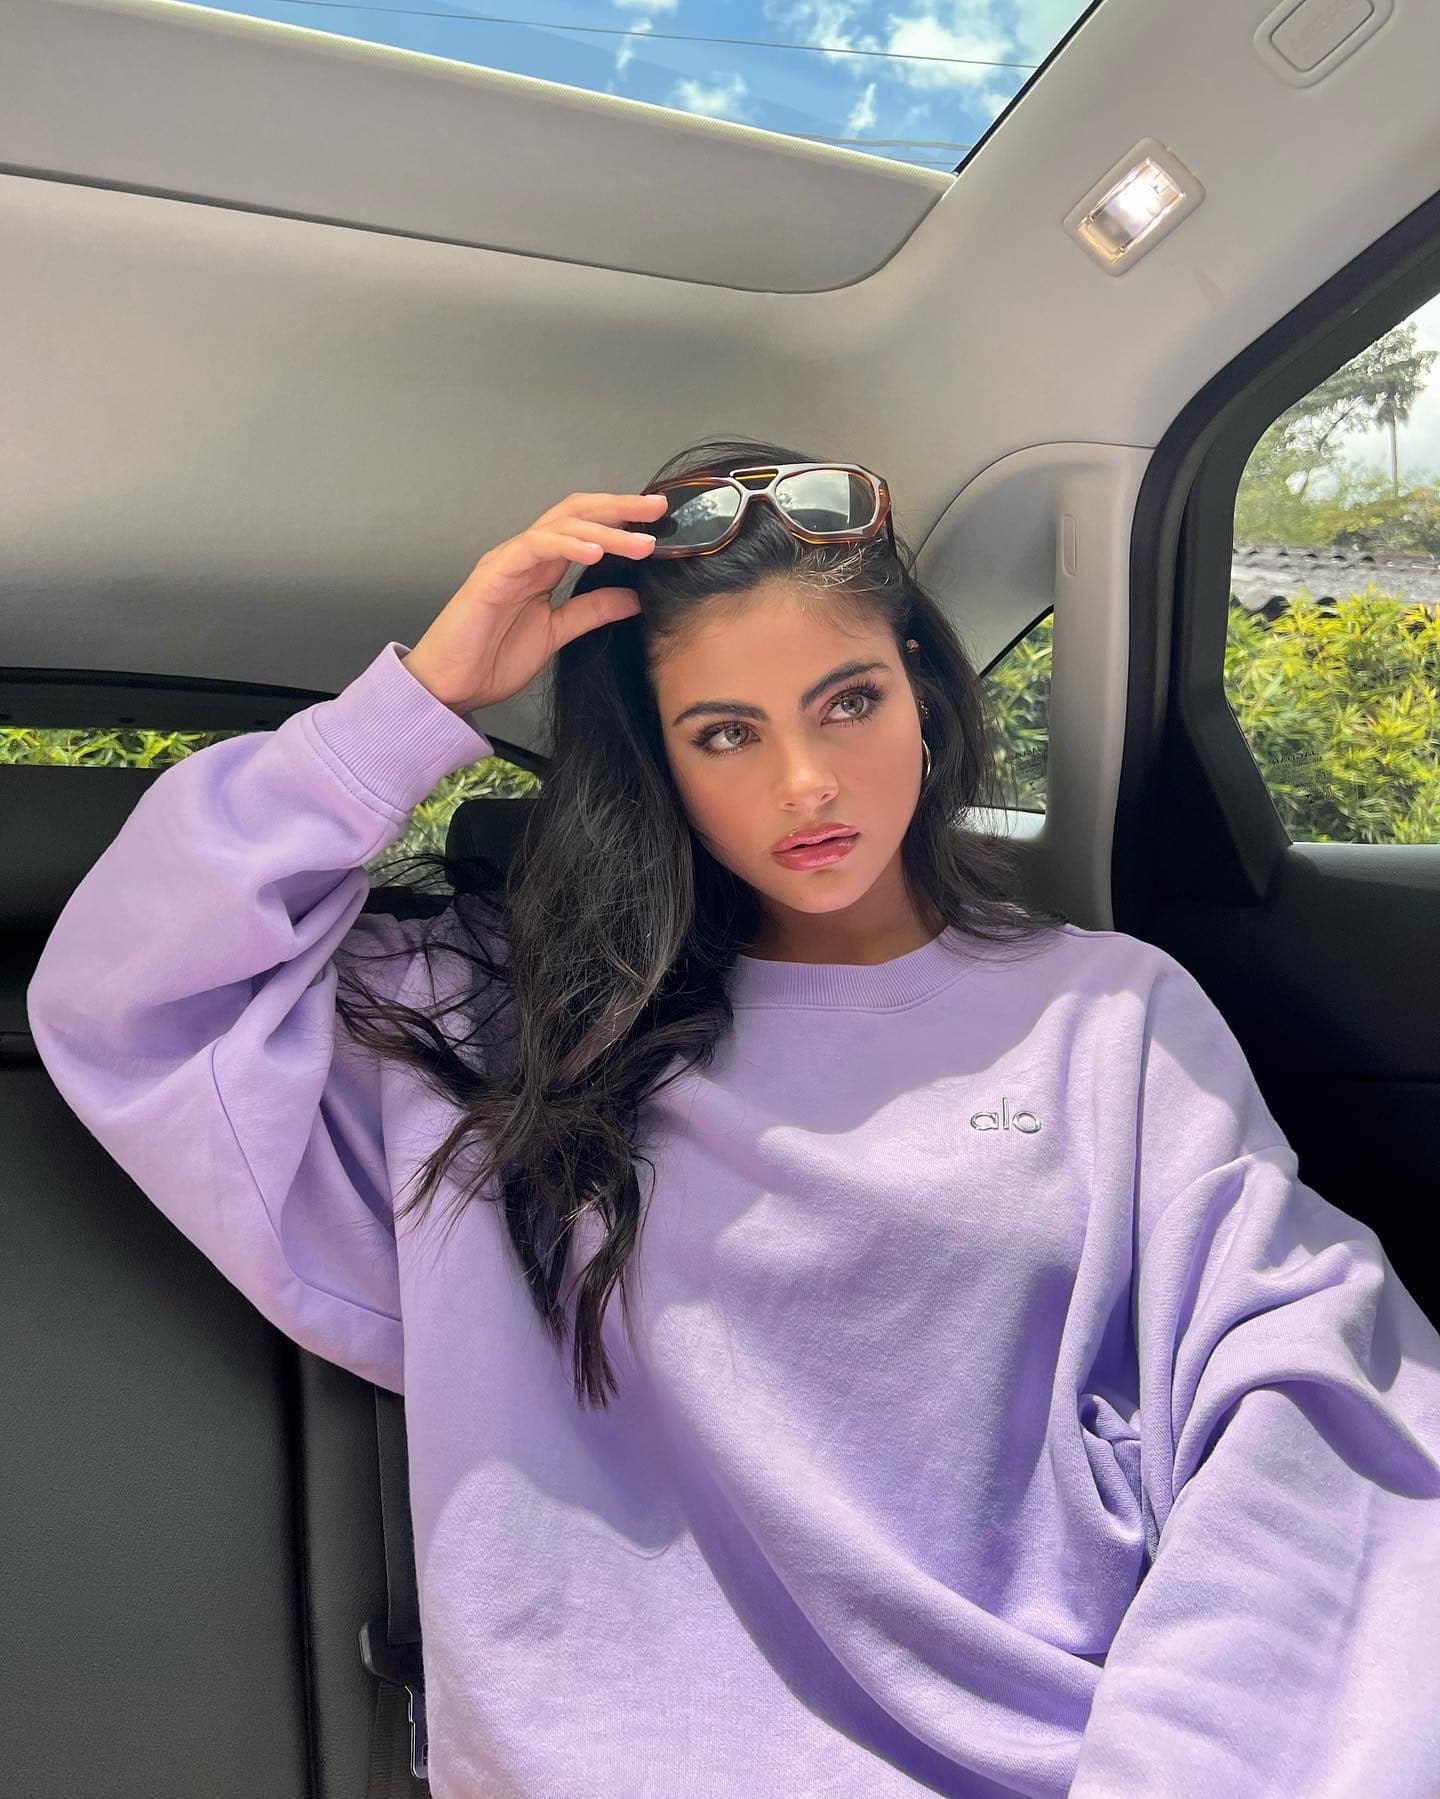 @saraorrego wearing a neon purple crew neck sweatshirt while sitting in a car posing with her hand on her sunglasses that are propped on the top of her head.  